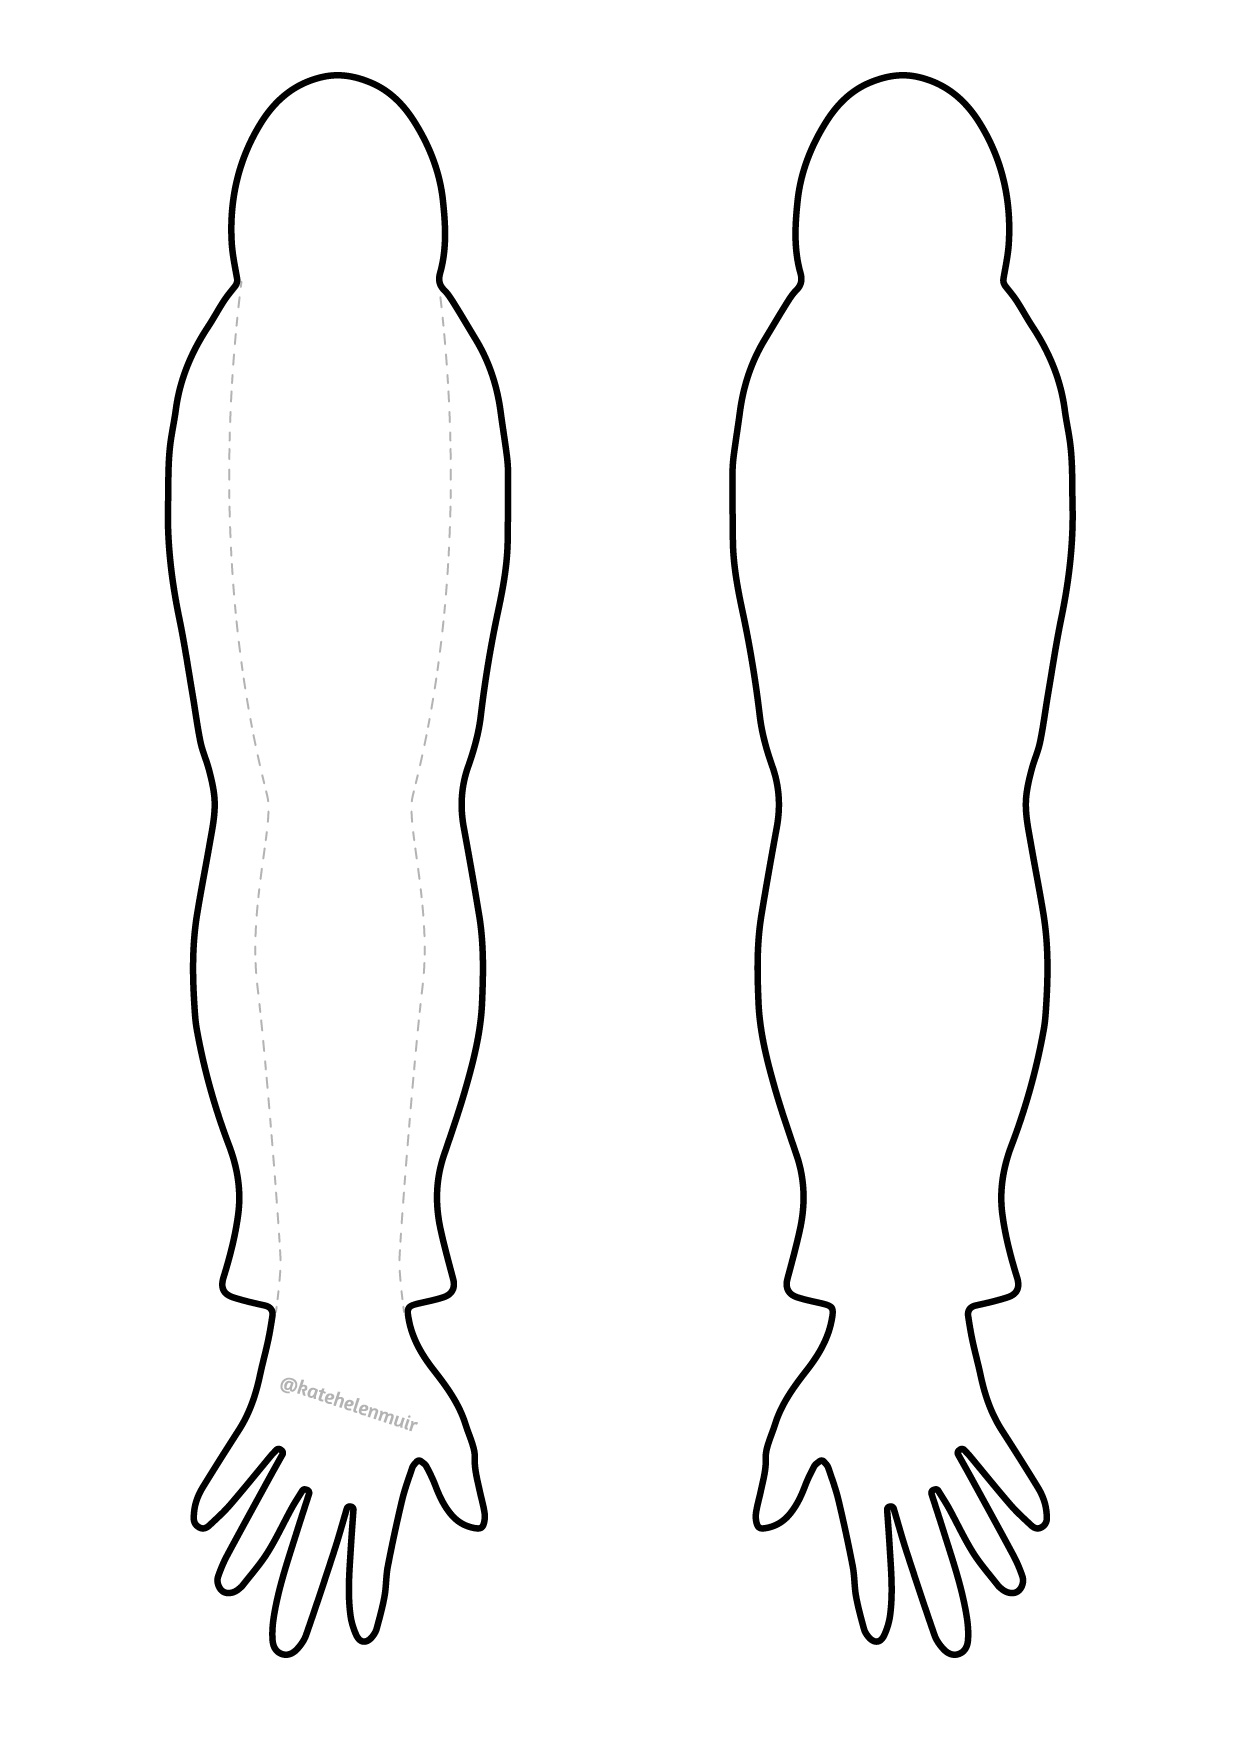 A template to use to draw a sleeve tattoo